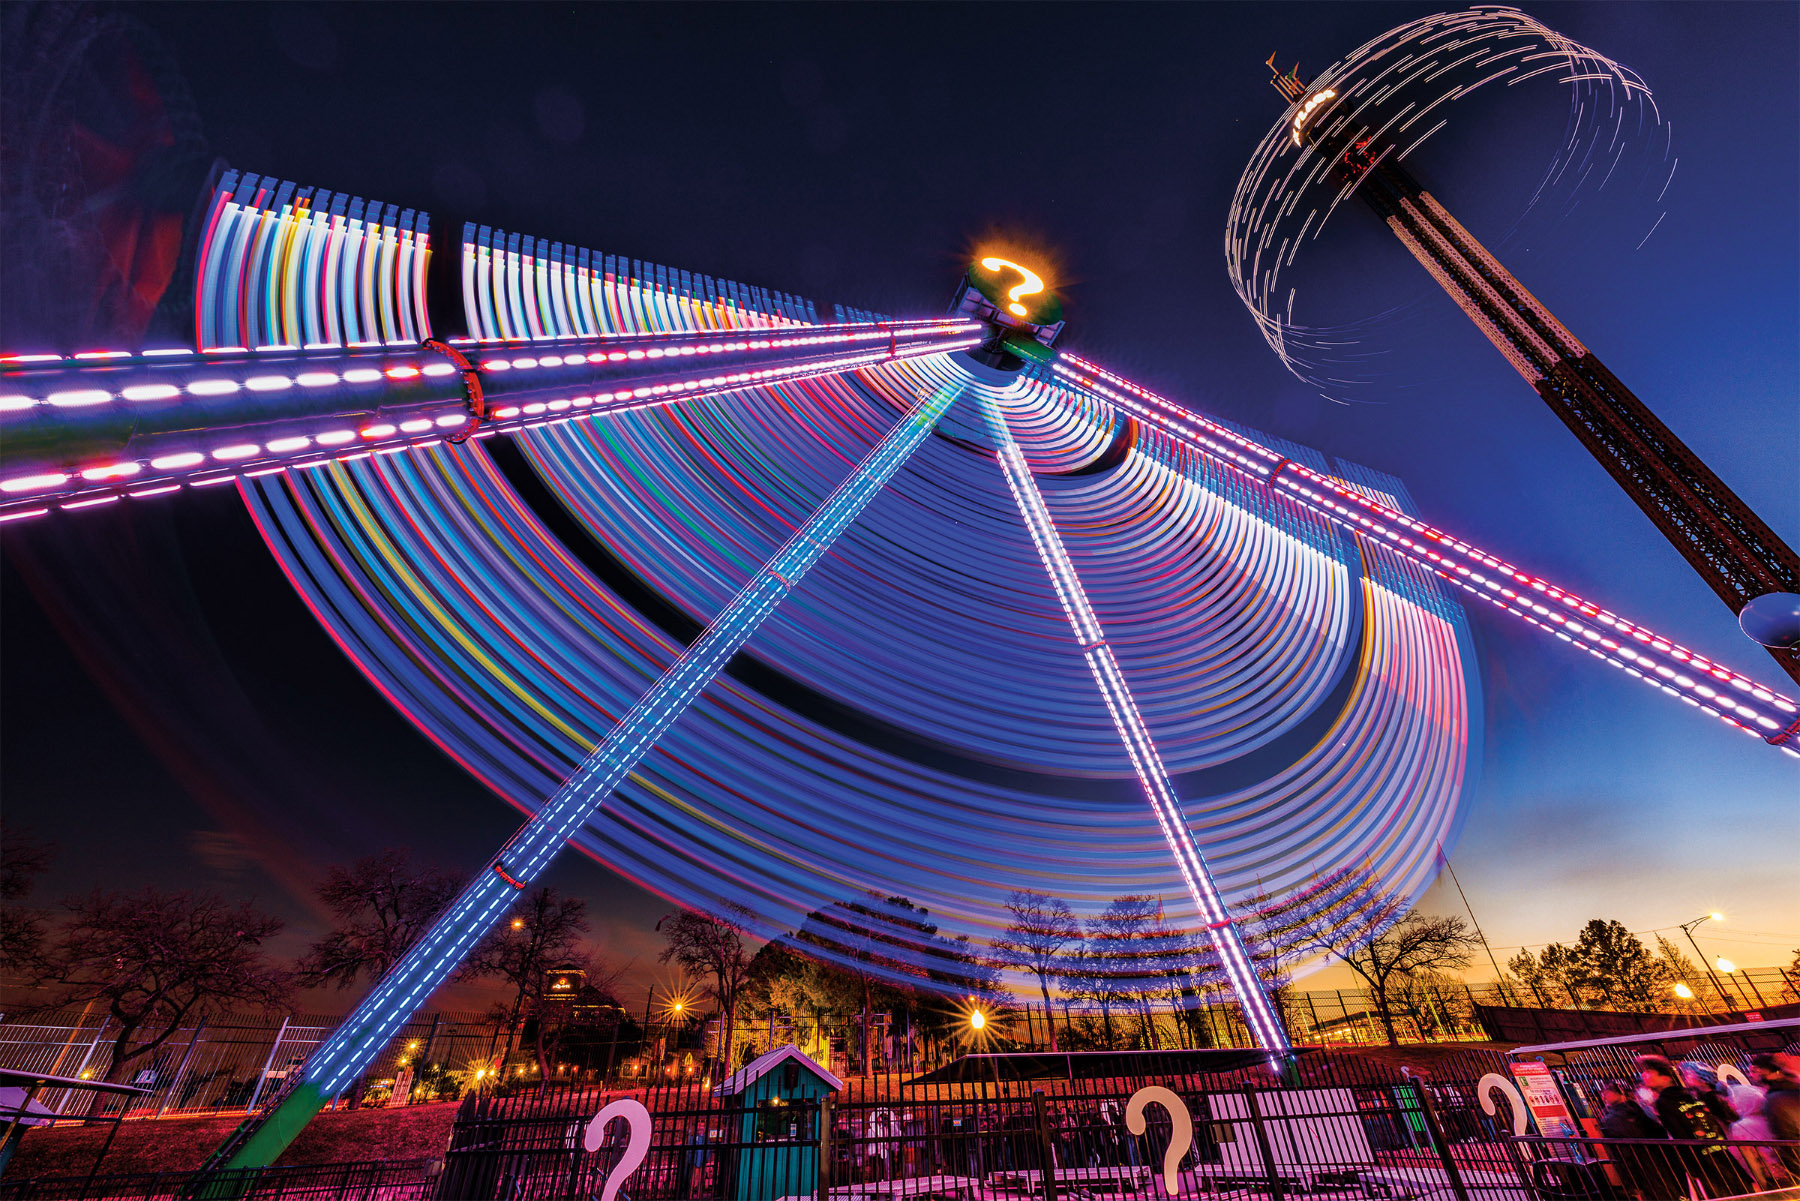 A picture of amusement park rides, their lights obscured and blurred by a long exposure